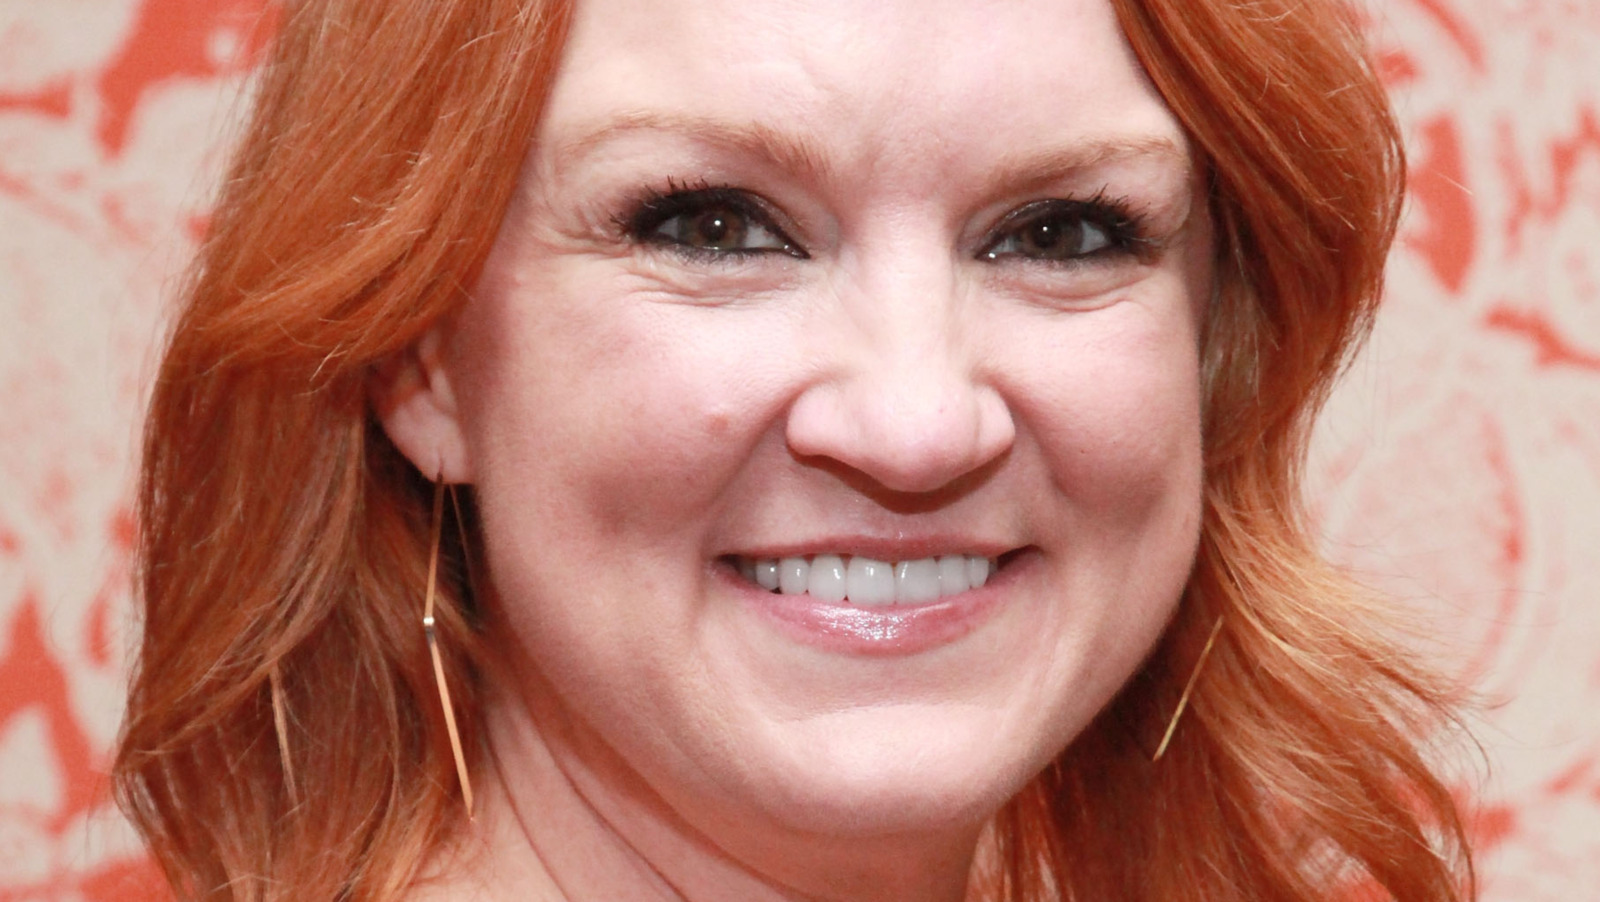 the tmi joke ree drummond made about her daughters wedding